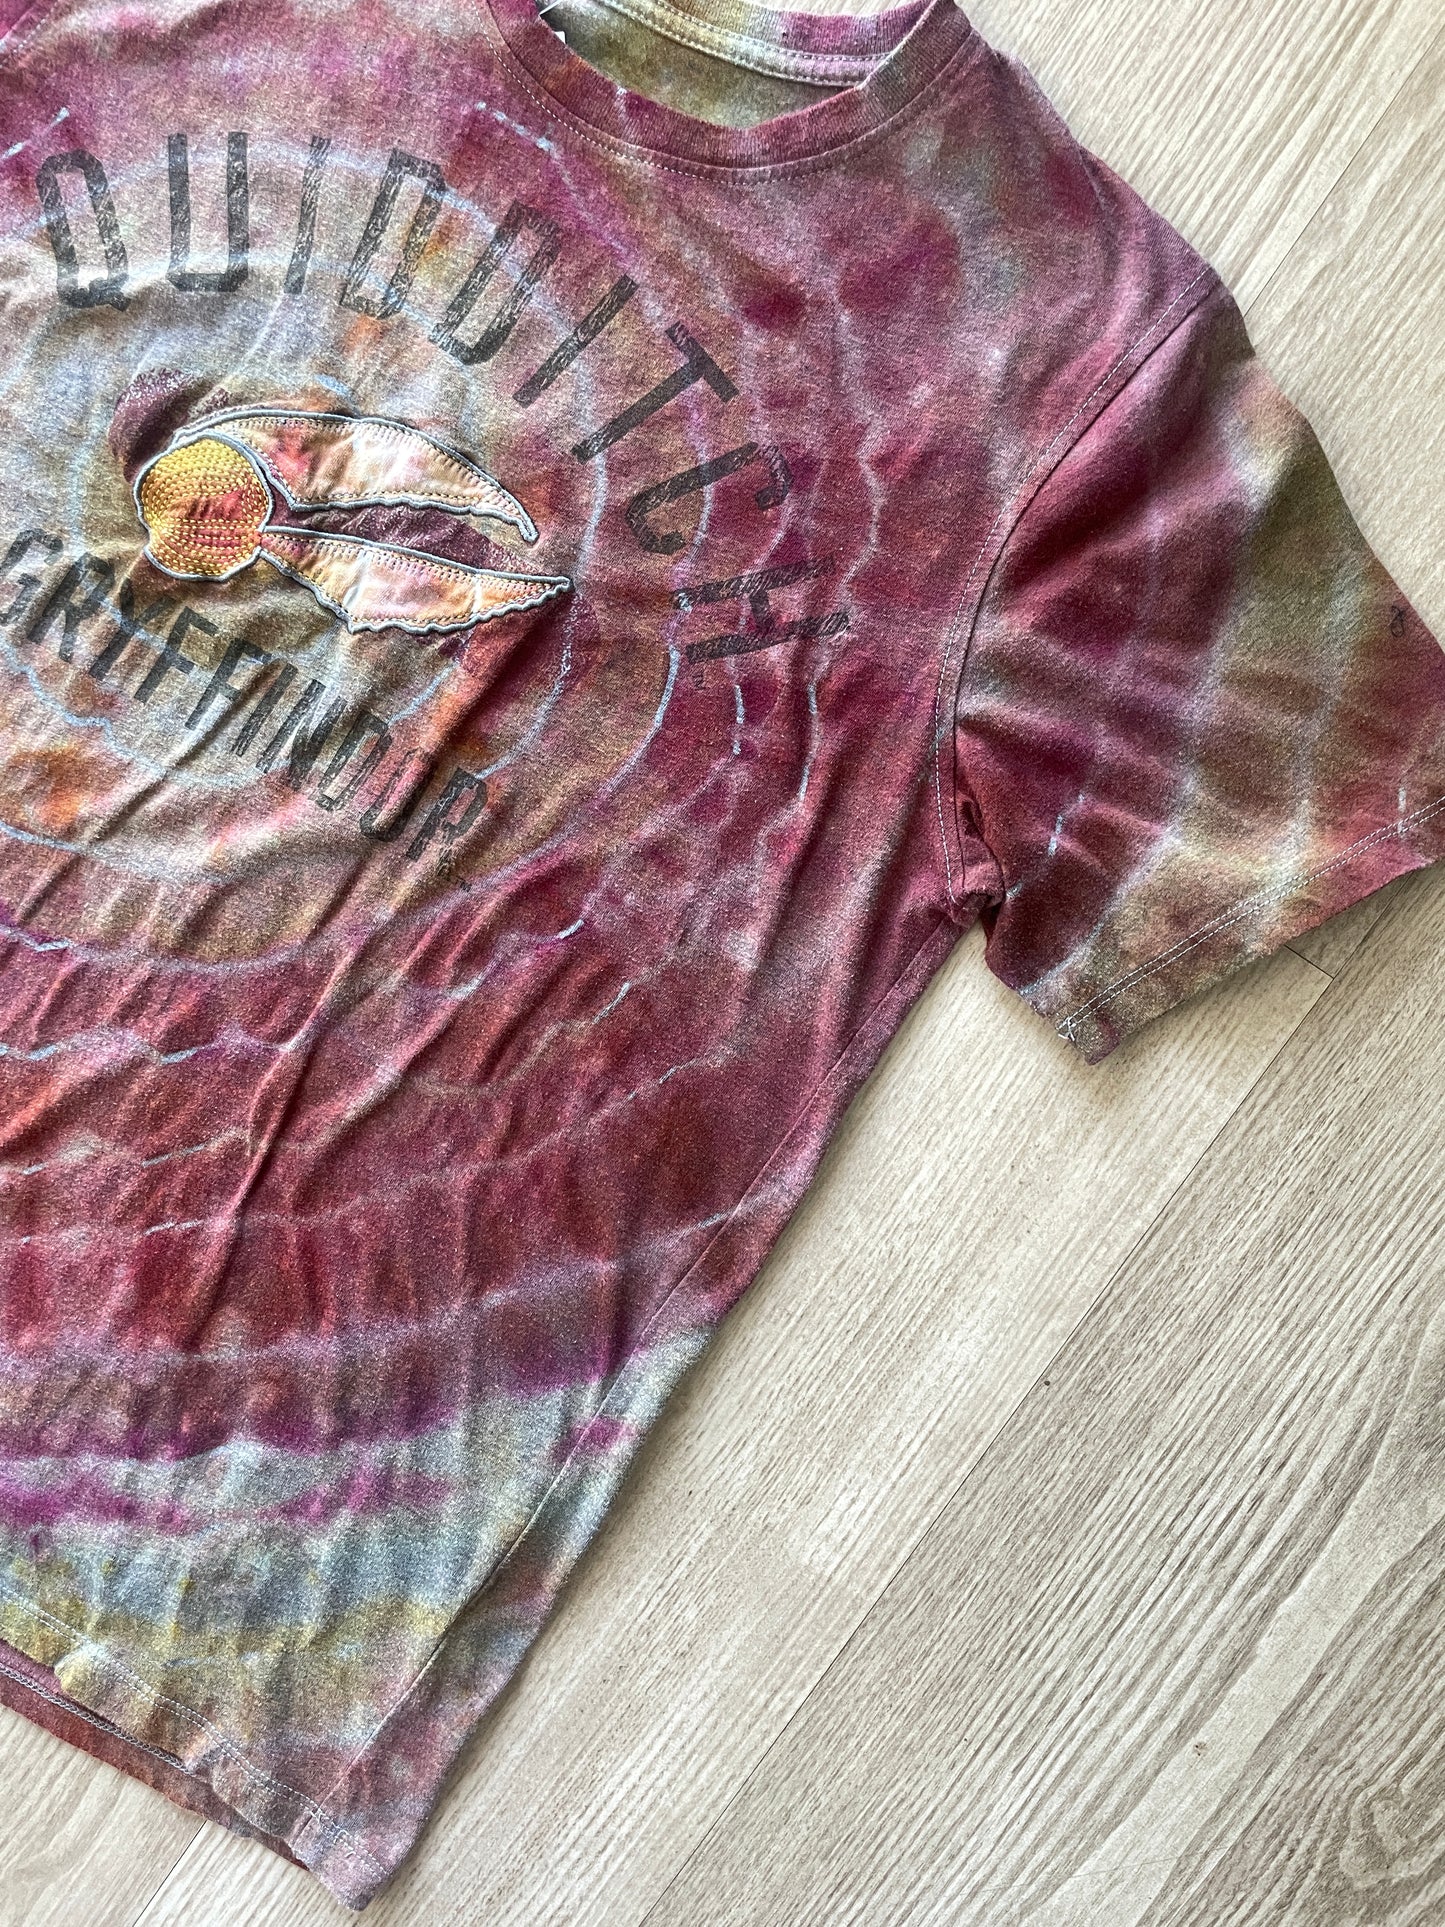 MEDIUM Men’s Harry Potter Gryffindor Quidditch Handmade Tie Dye Short Sleeve T-Shirt | One-Of-a-Kind Upcycled Red and Yellow Geode Top